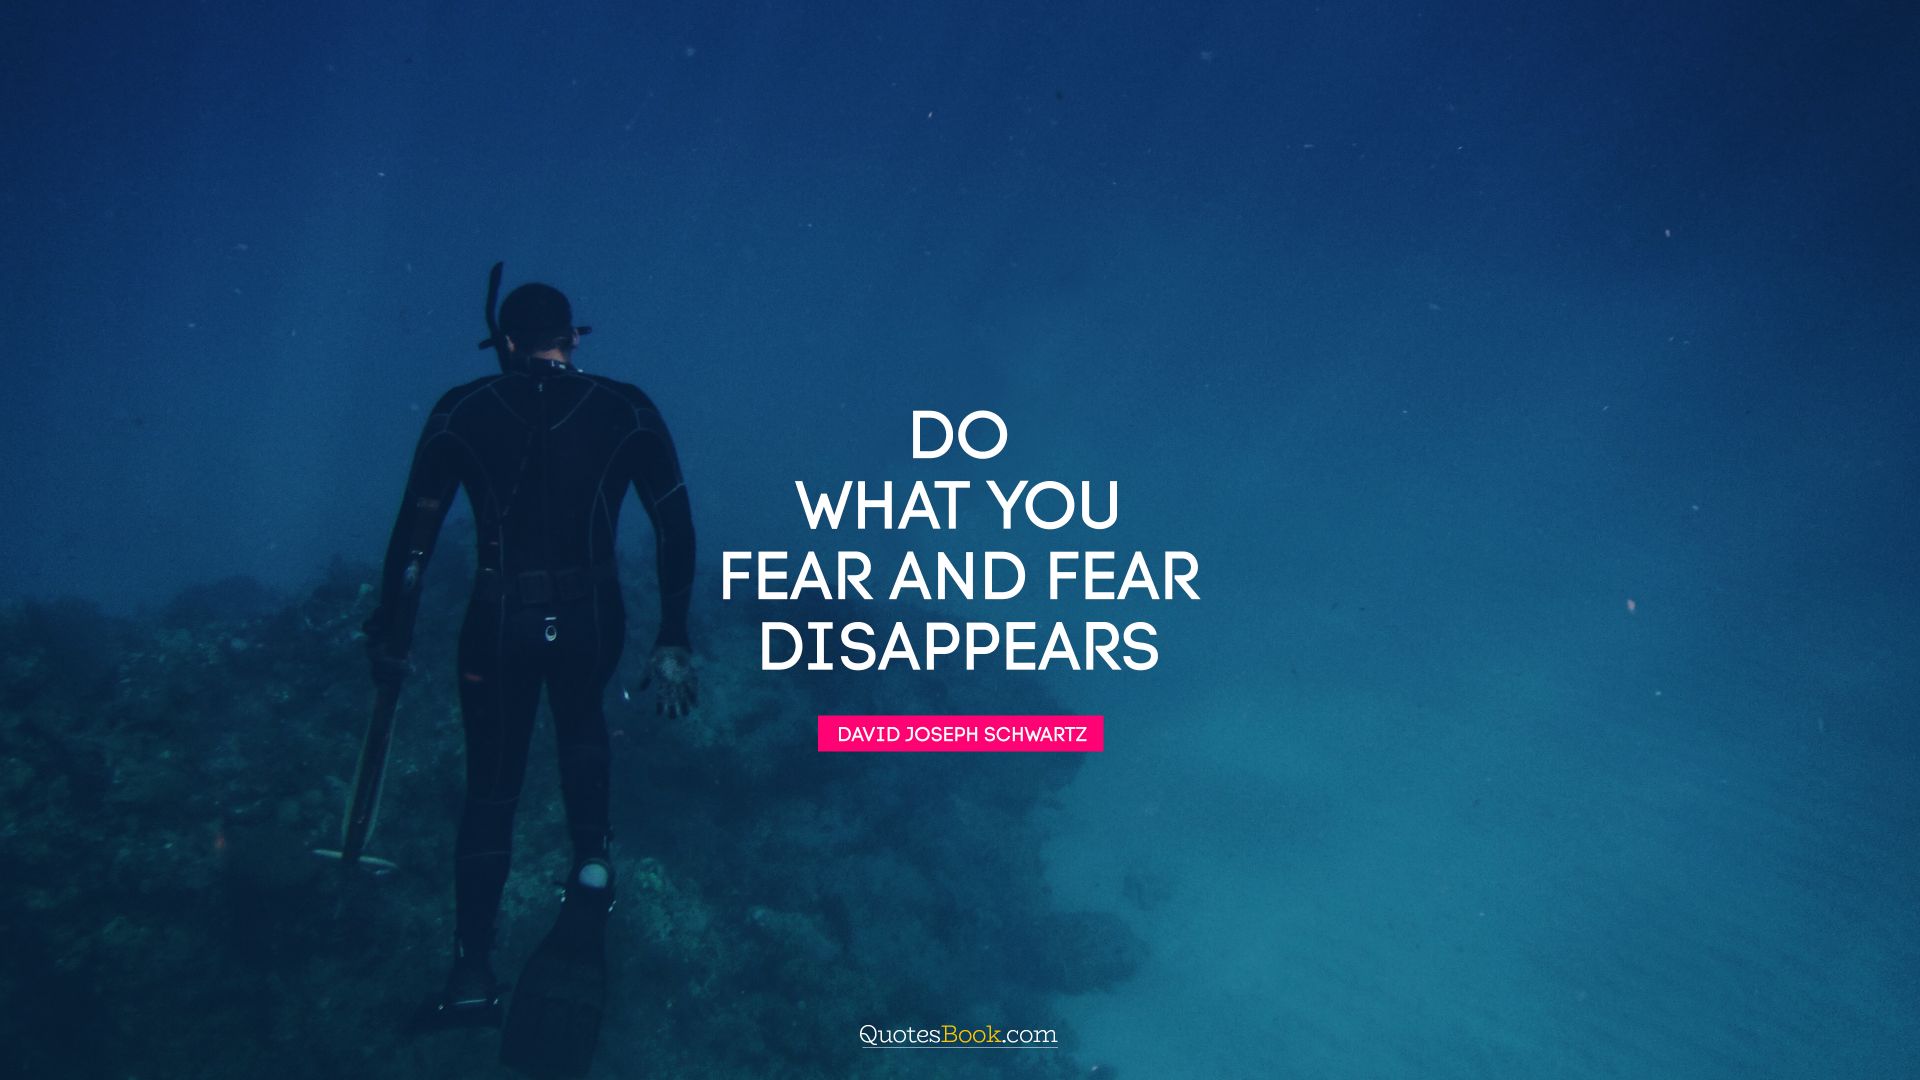 Do what you fear and fear disappears. - Quote by David Joseph Schwartz